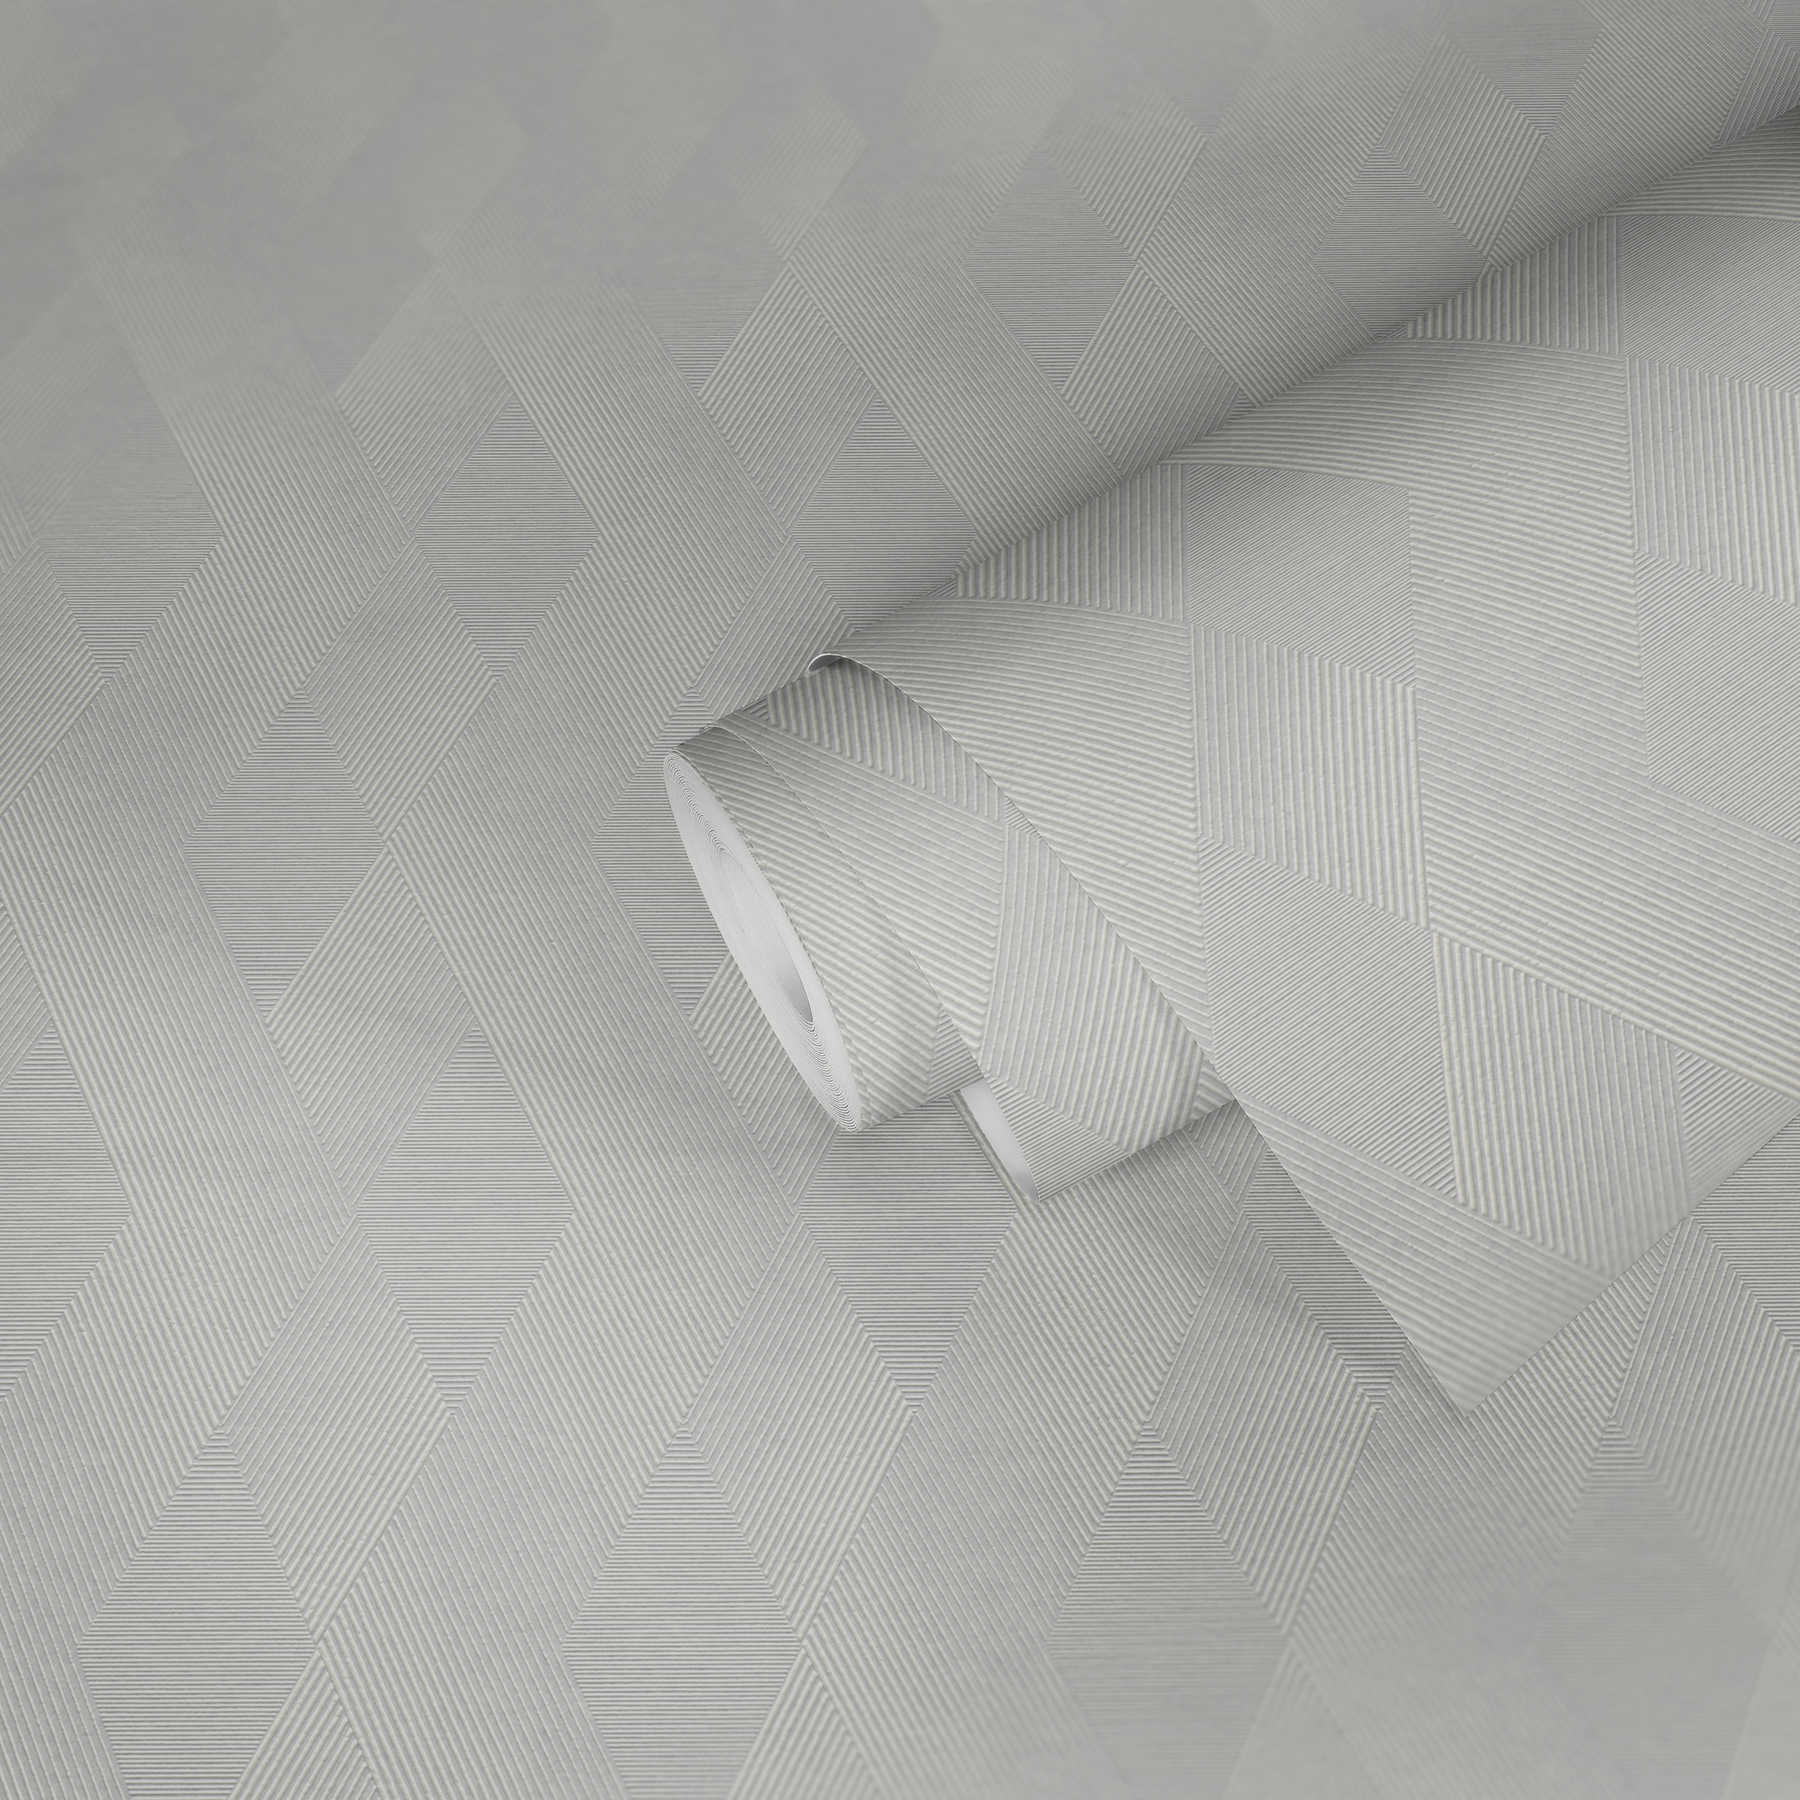             Tone on tone wallpaper with line pattern & texture embossing - white
        